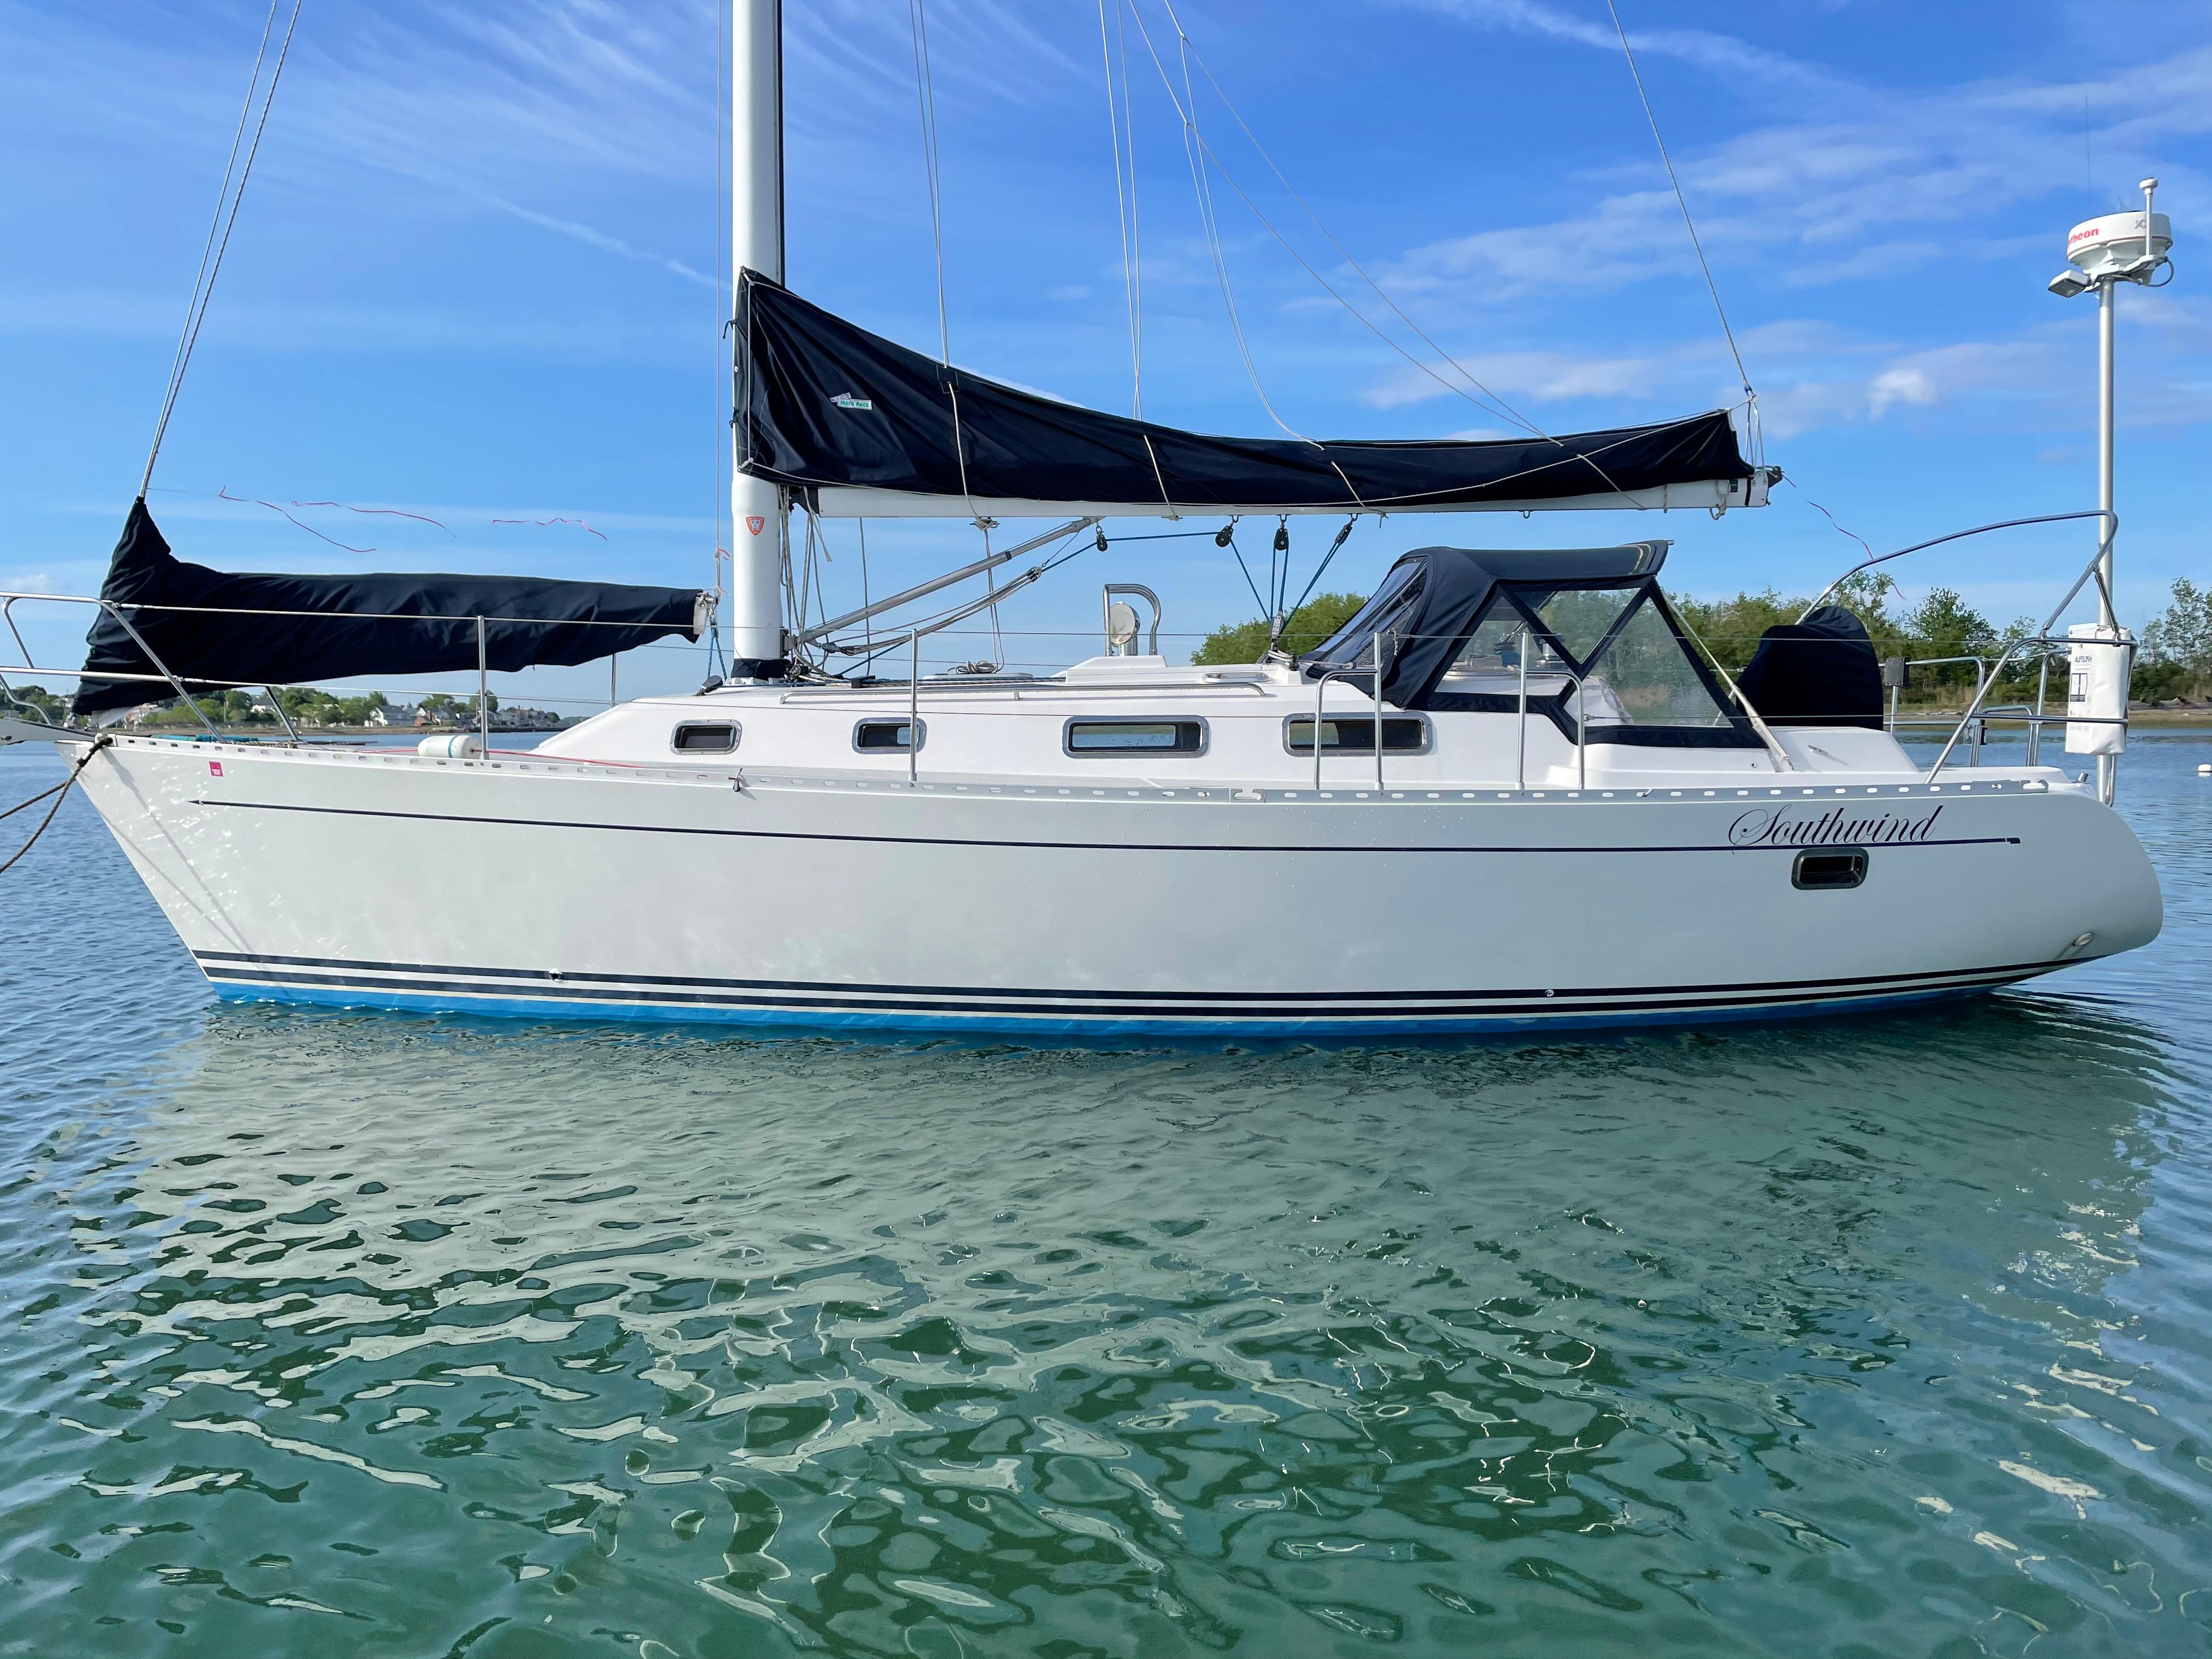 freedom 35 yacht for sale